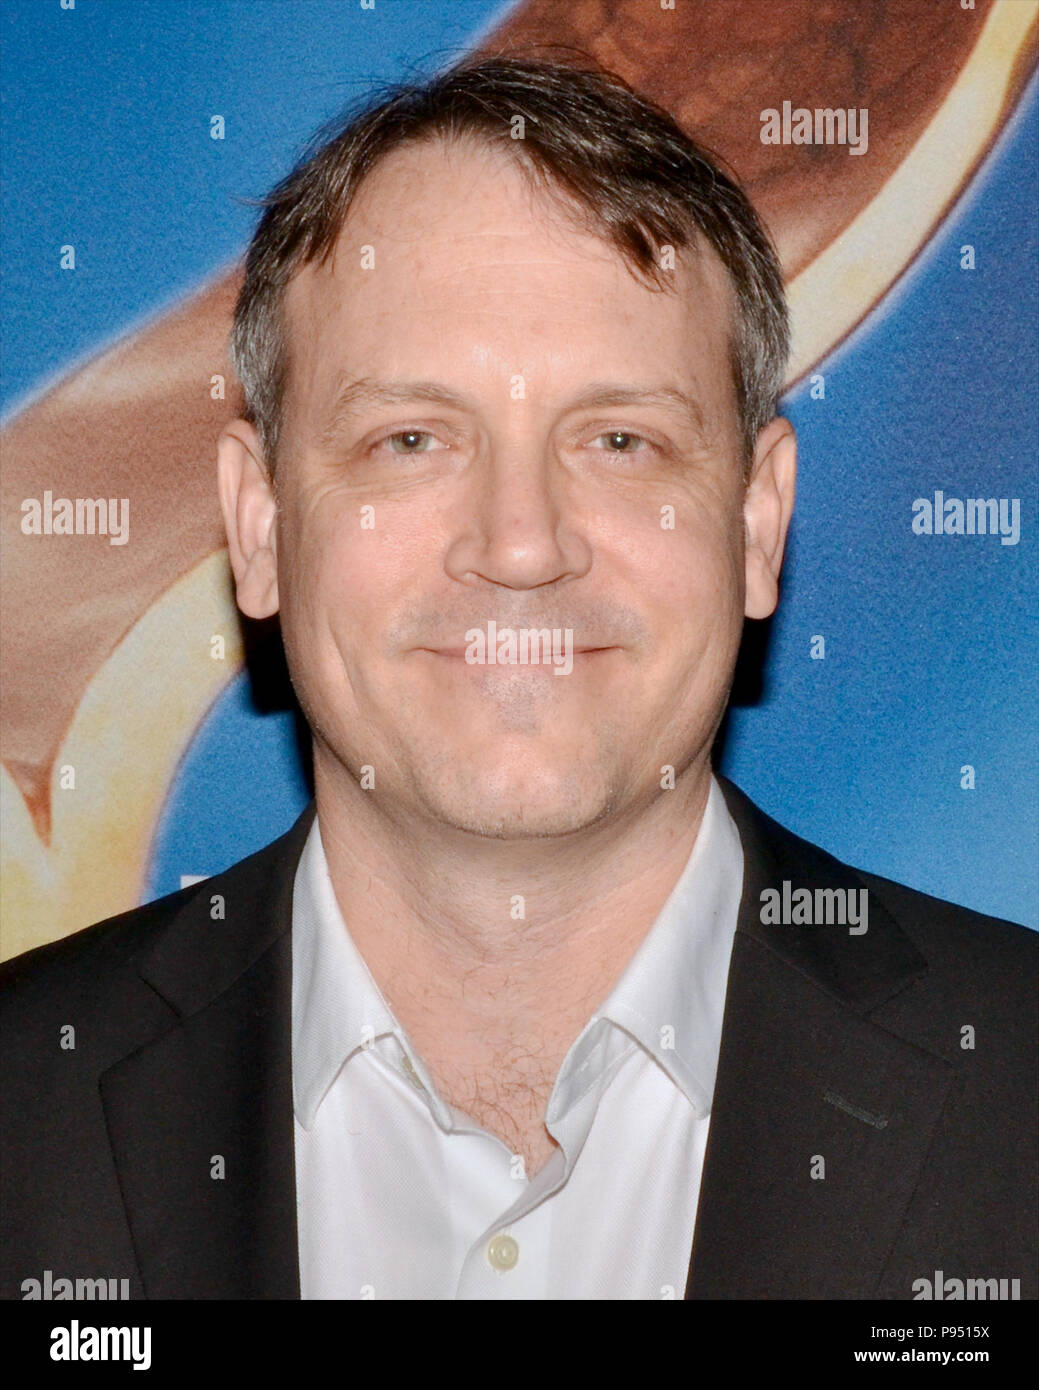 Hollywood, California, USA. 5th Feb, 2015. GRAHAM MOORE attends the 2015 Writers Guild Awards Annual Beyond Words Panel Honoring Academy Awards Nominated Writers at the Writers Guild of America. Credit: Billy Bennight/ZUMA Wire/Alamy Live News Stock Photo